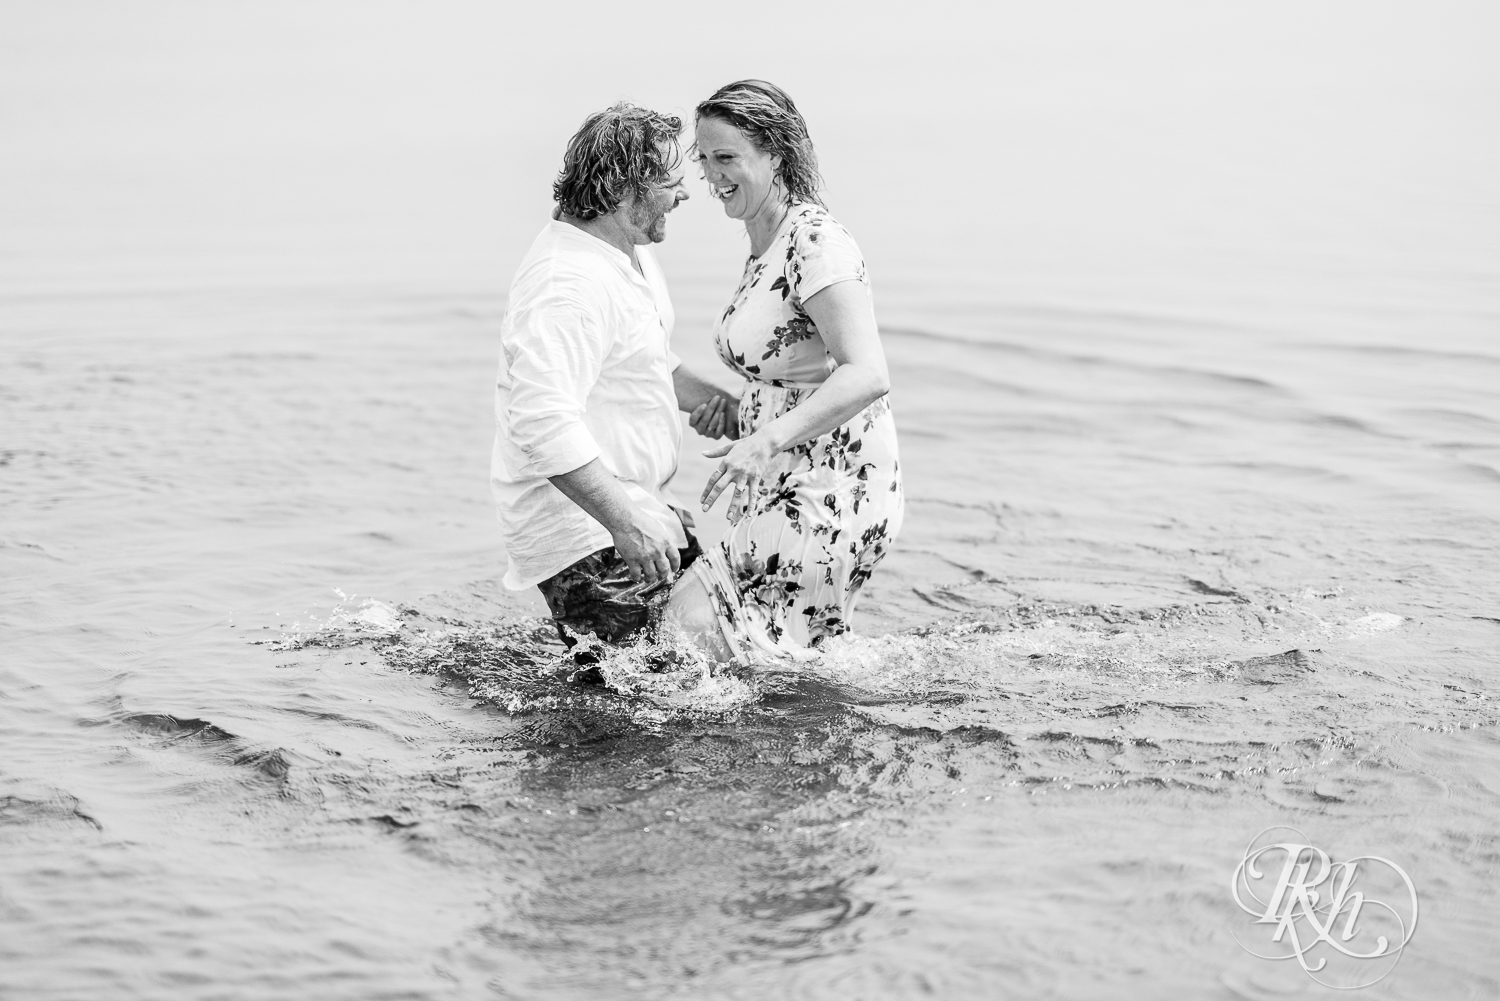 Man and woman splash water at each other in Lake Superior during engagement photos on Park Point Beach in Duluth, Minnesota.